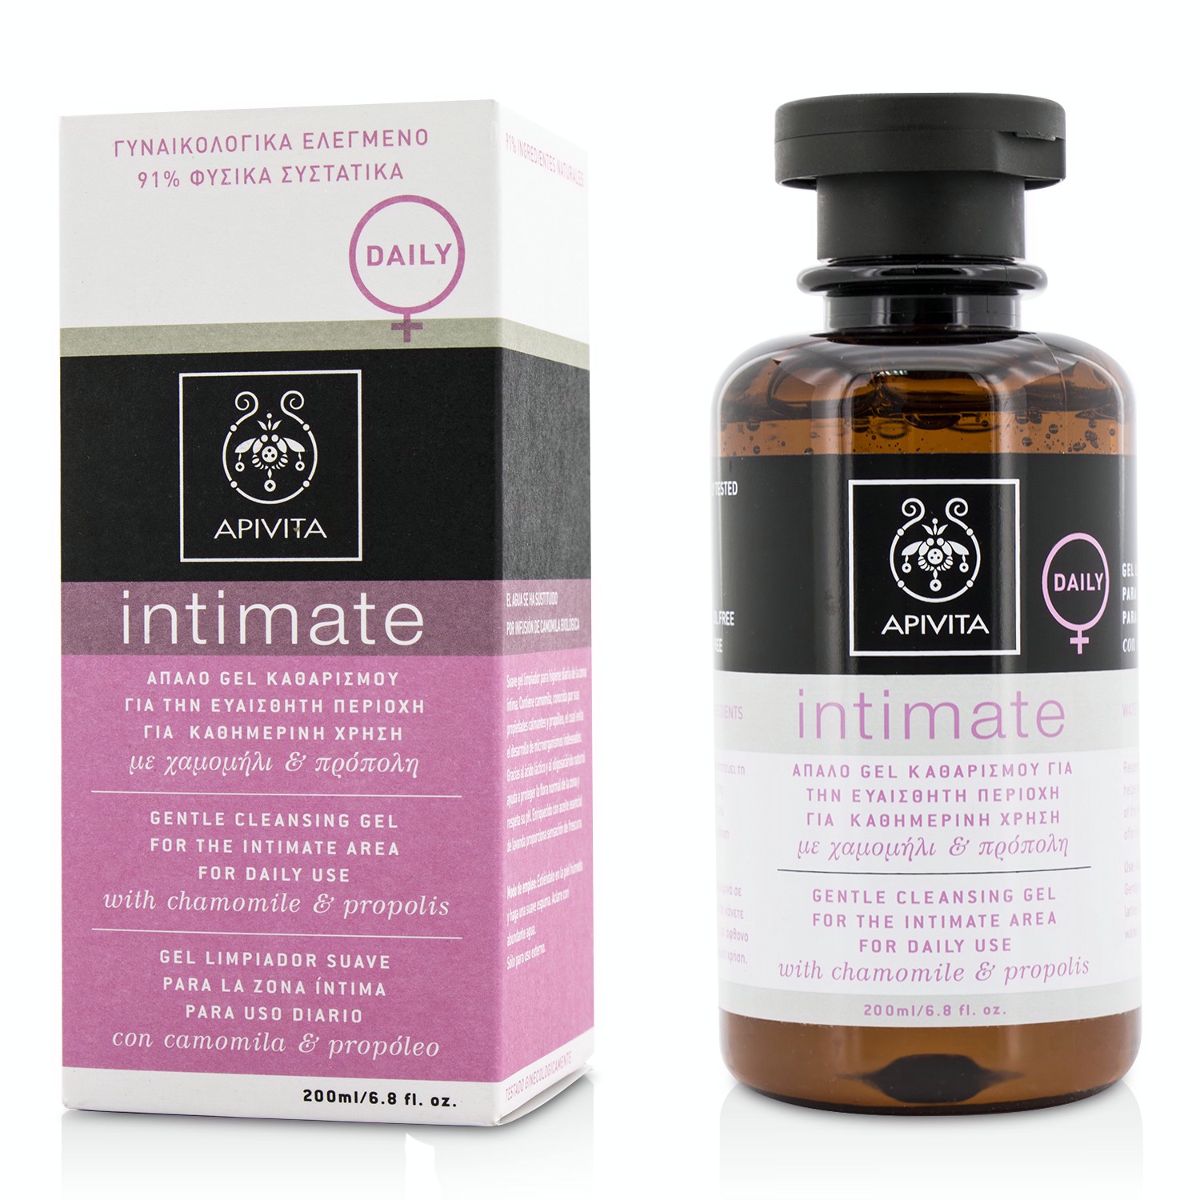 Intimate Gentle Cleansing Gel For The Intimate Area For Daily Use with Chamomile  Propolis Apivita Image